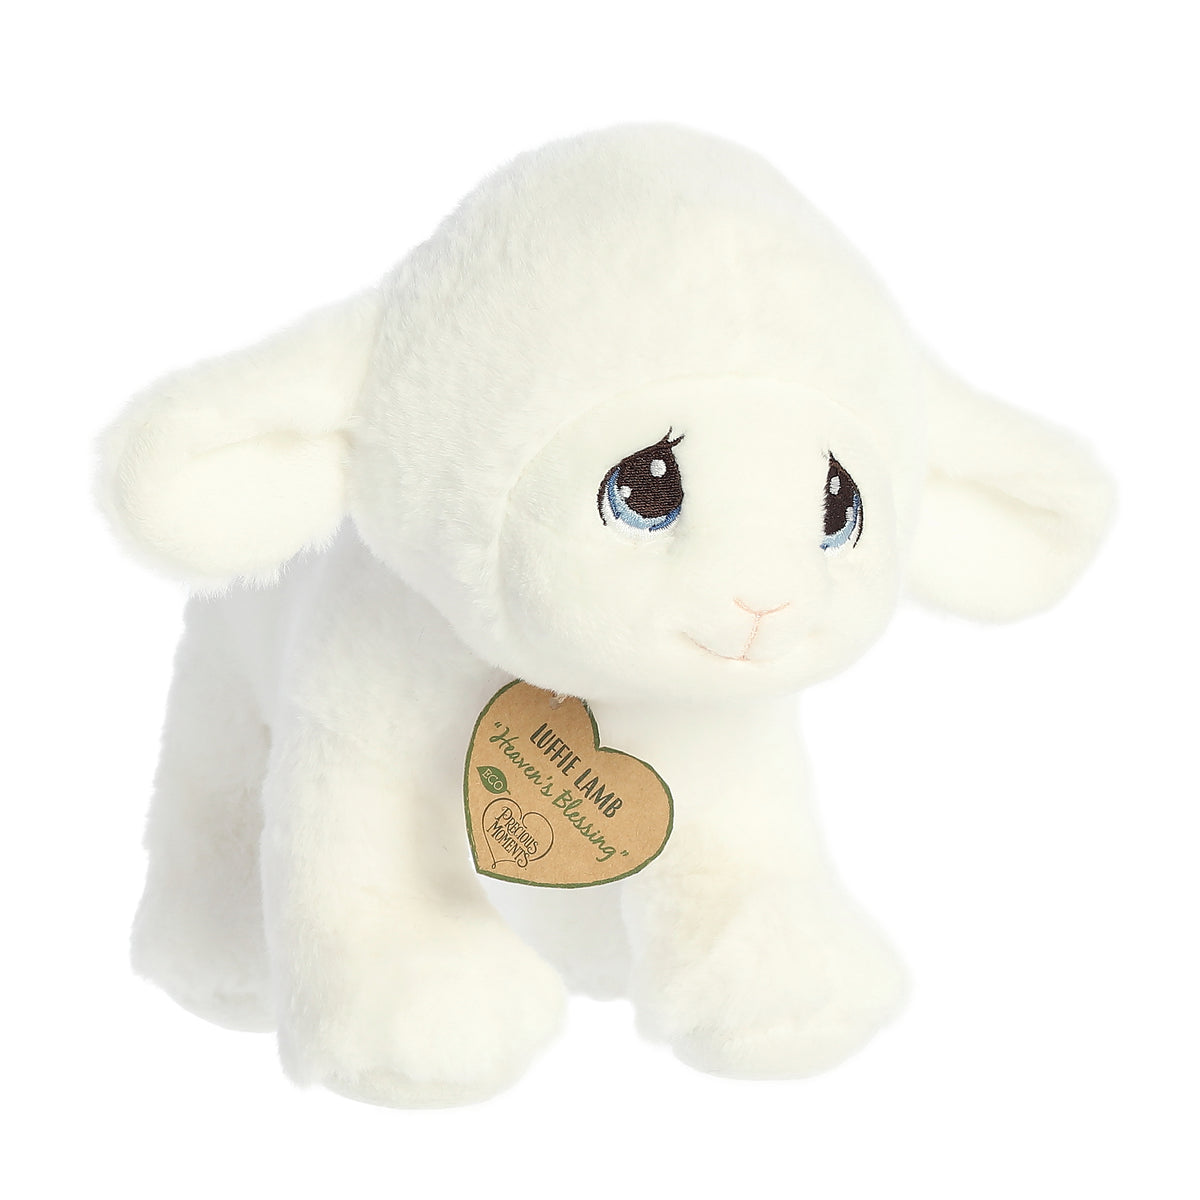 An eco-friendly lamb plush with tear-drop eyes, cloud-like white fur, and a precious moments inspirational tag on its neck.